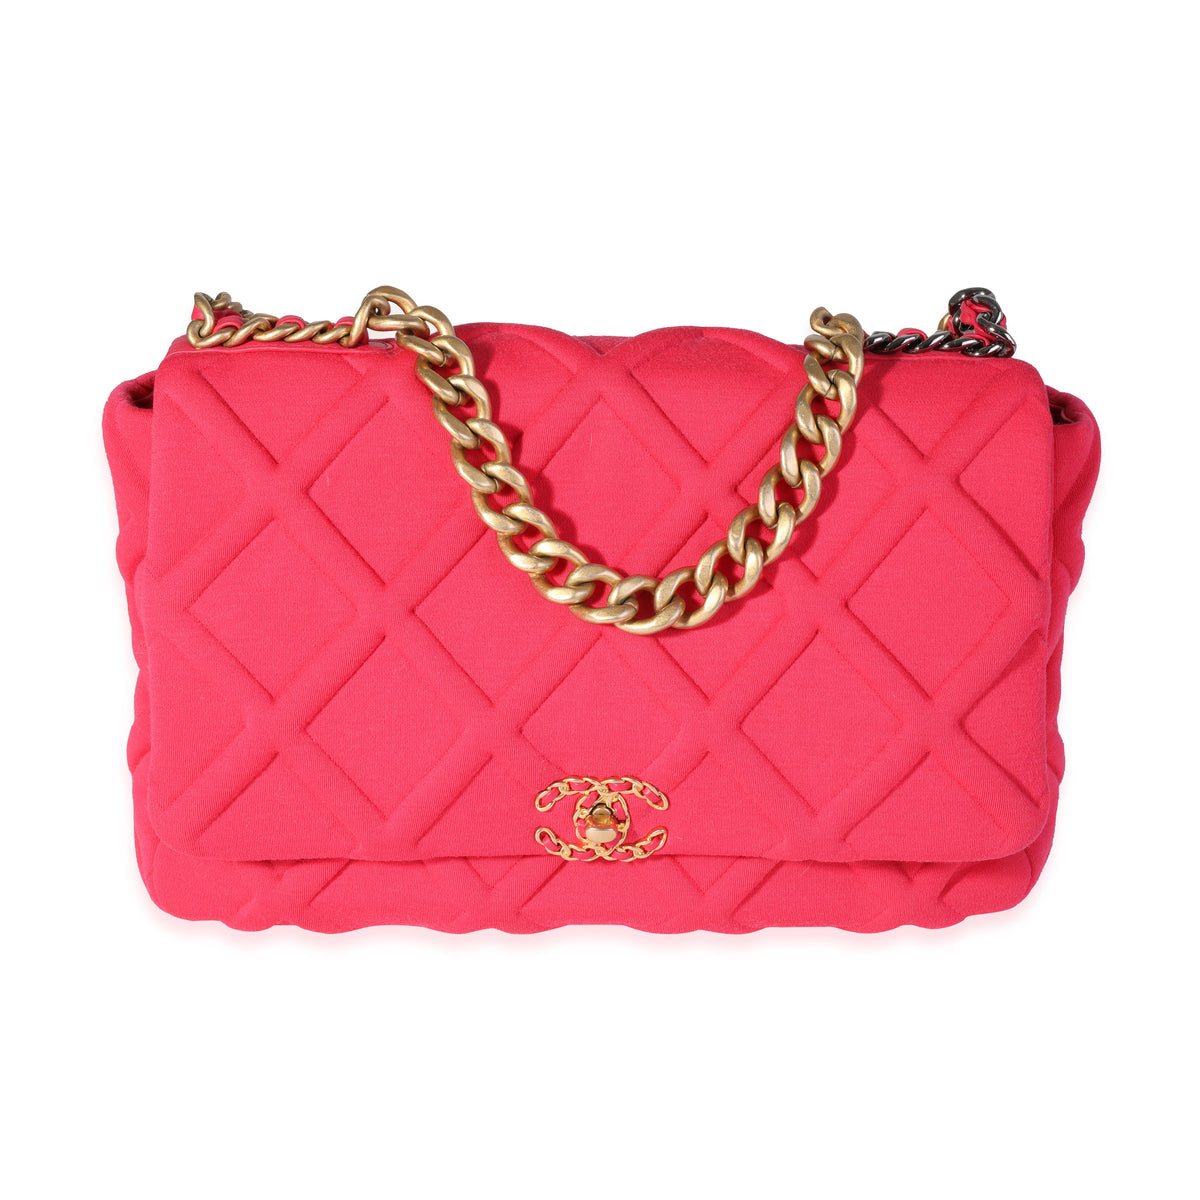 Chanel Hot Pink Quilted Jersey Large Chanel 19 Flap Bag, myGemma, QA